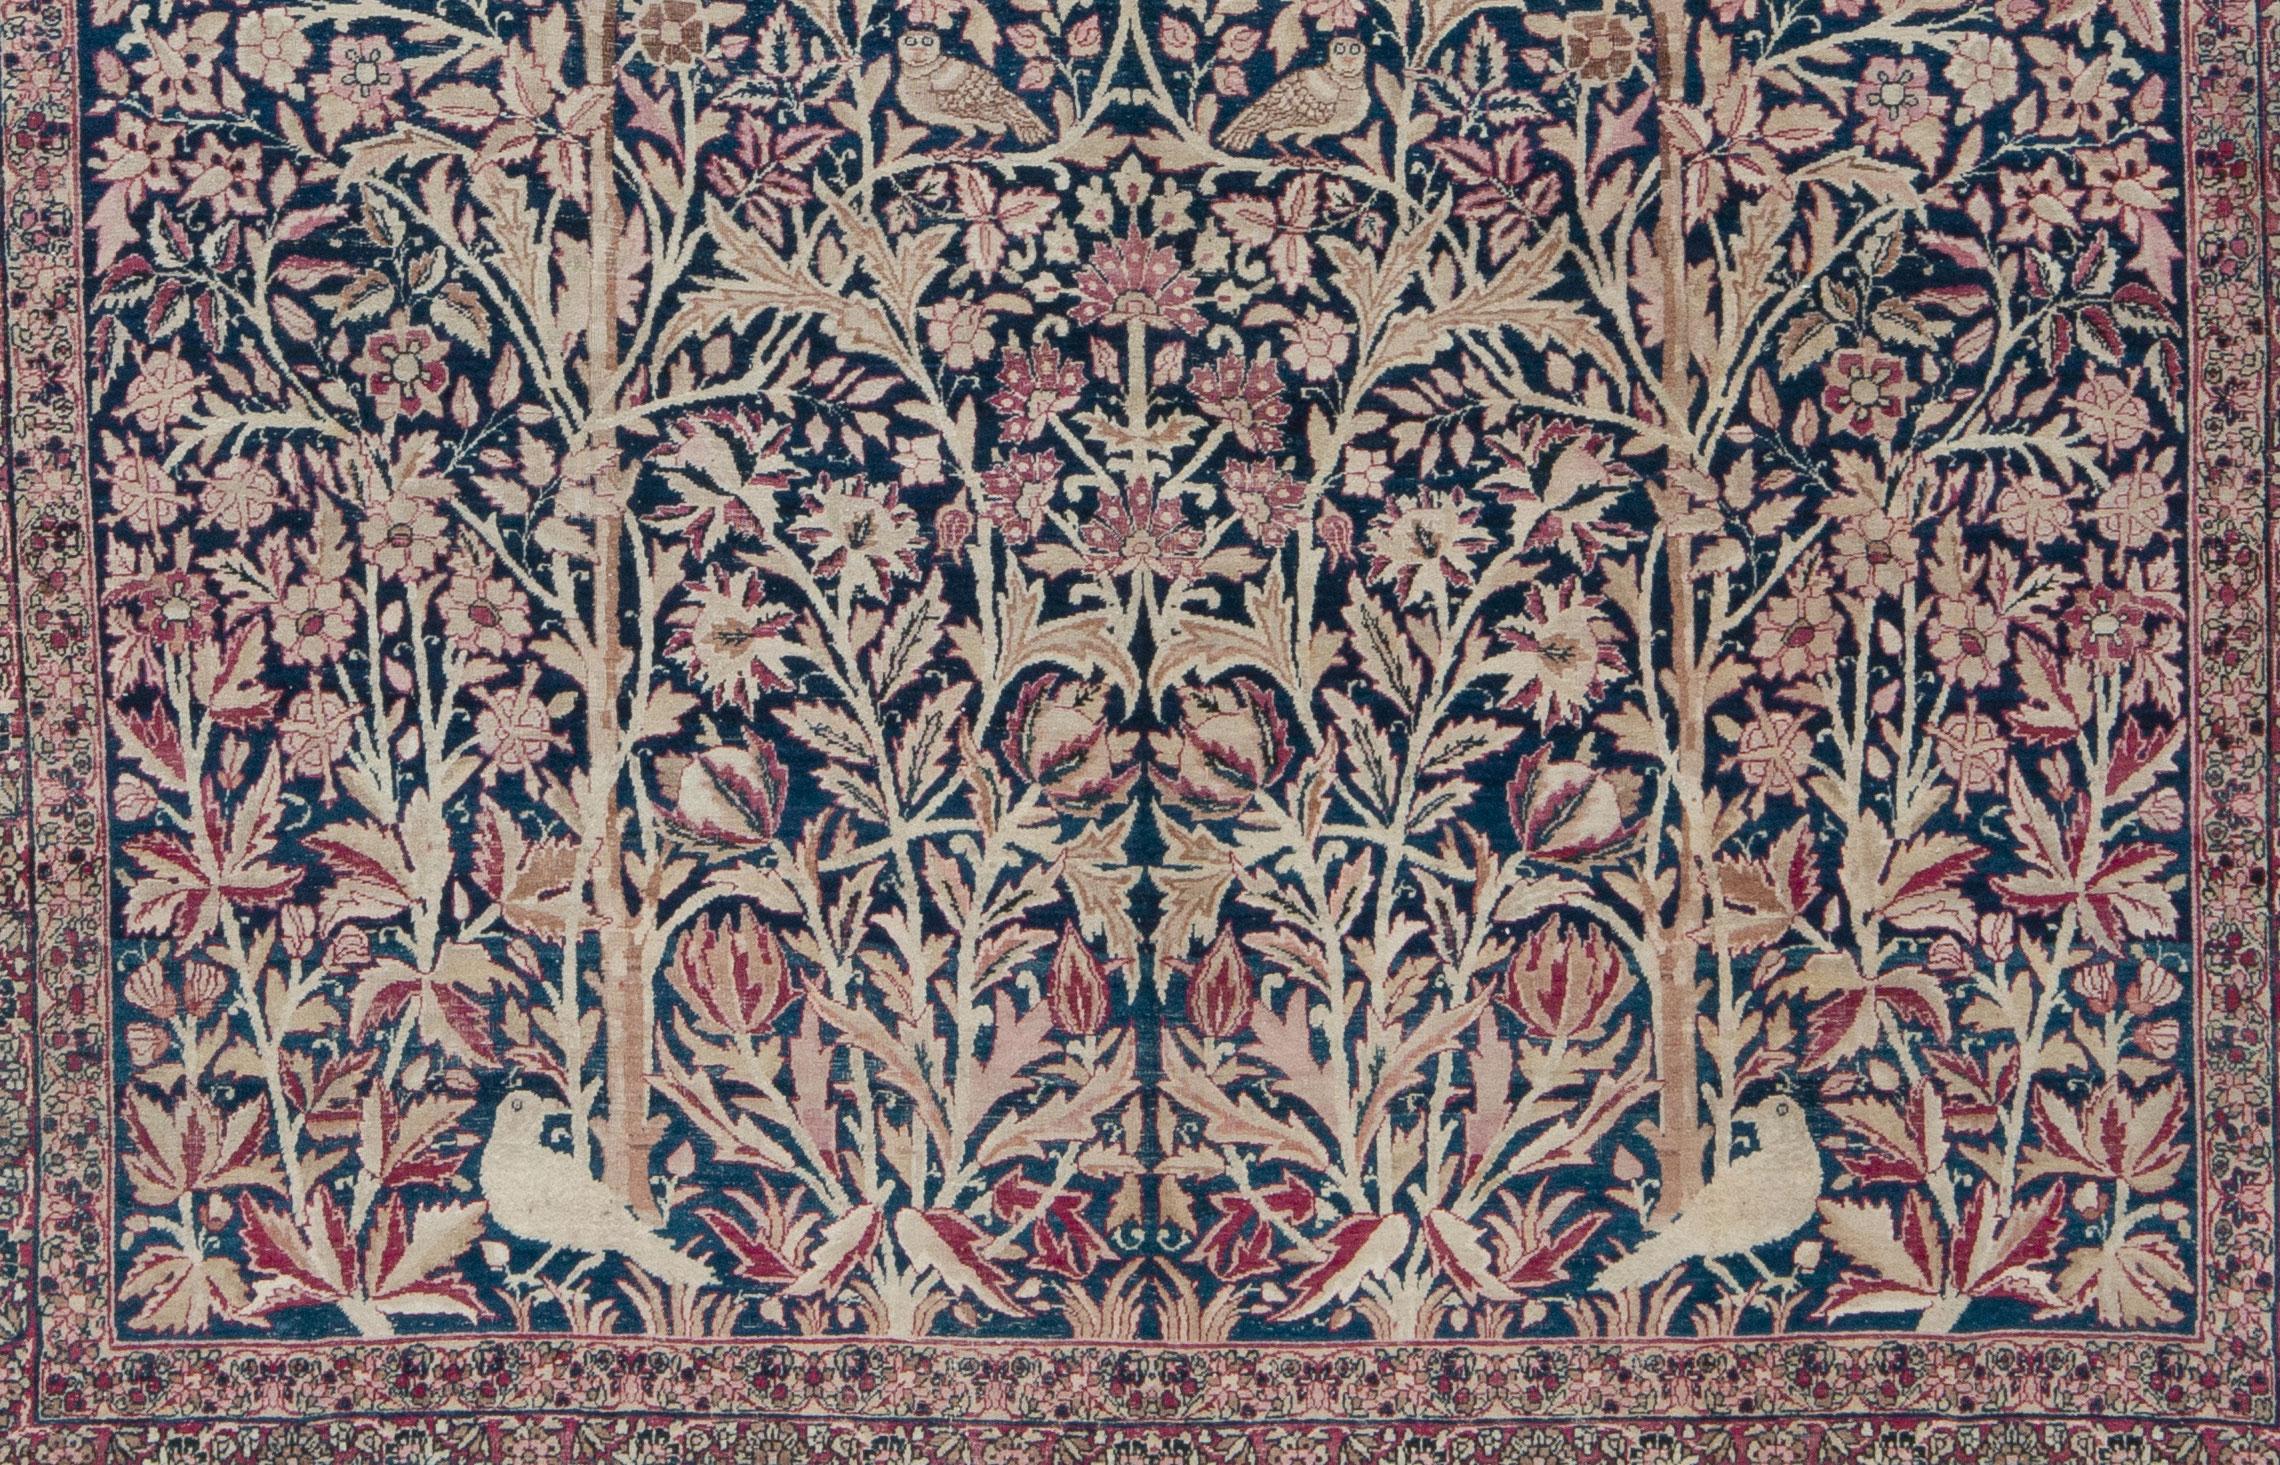 Wood Antique Persian Lavar Botanical Rug, late 19th Century  For Sale